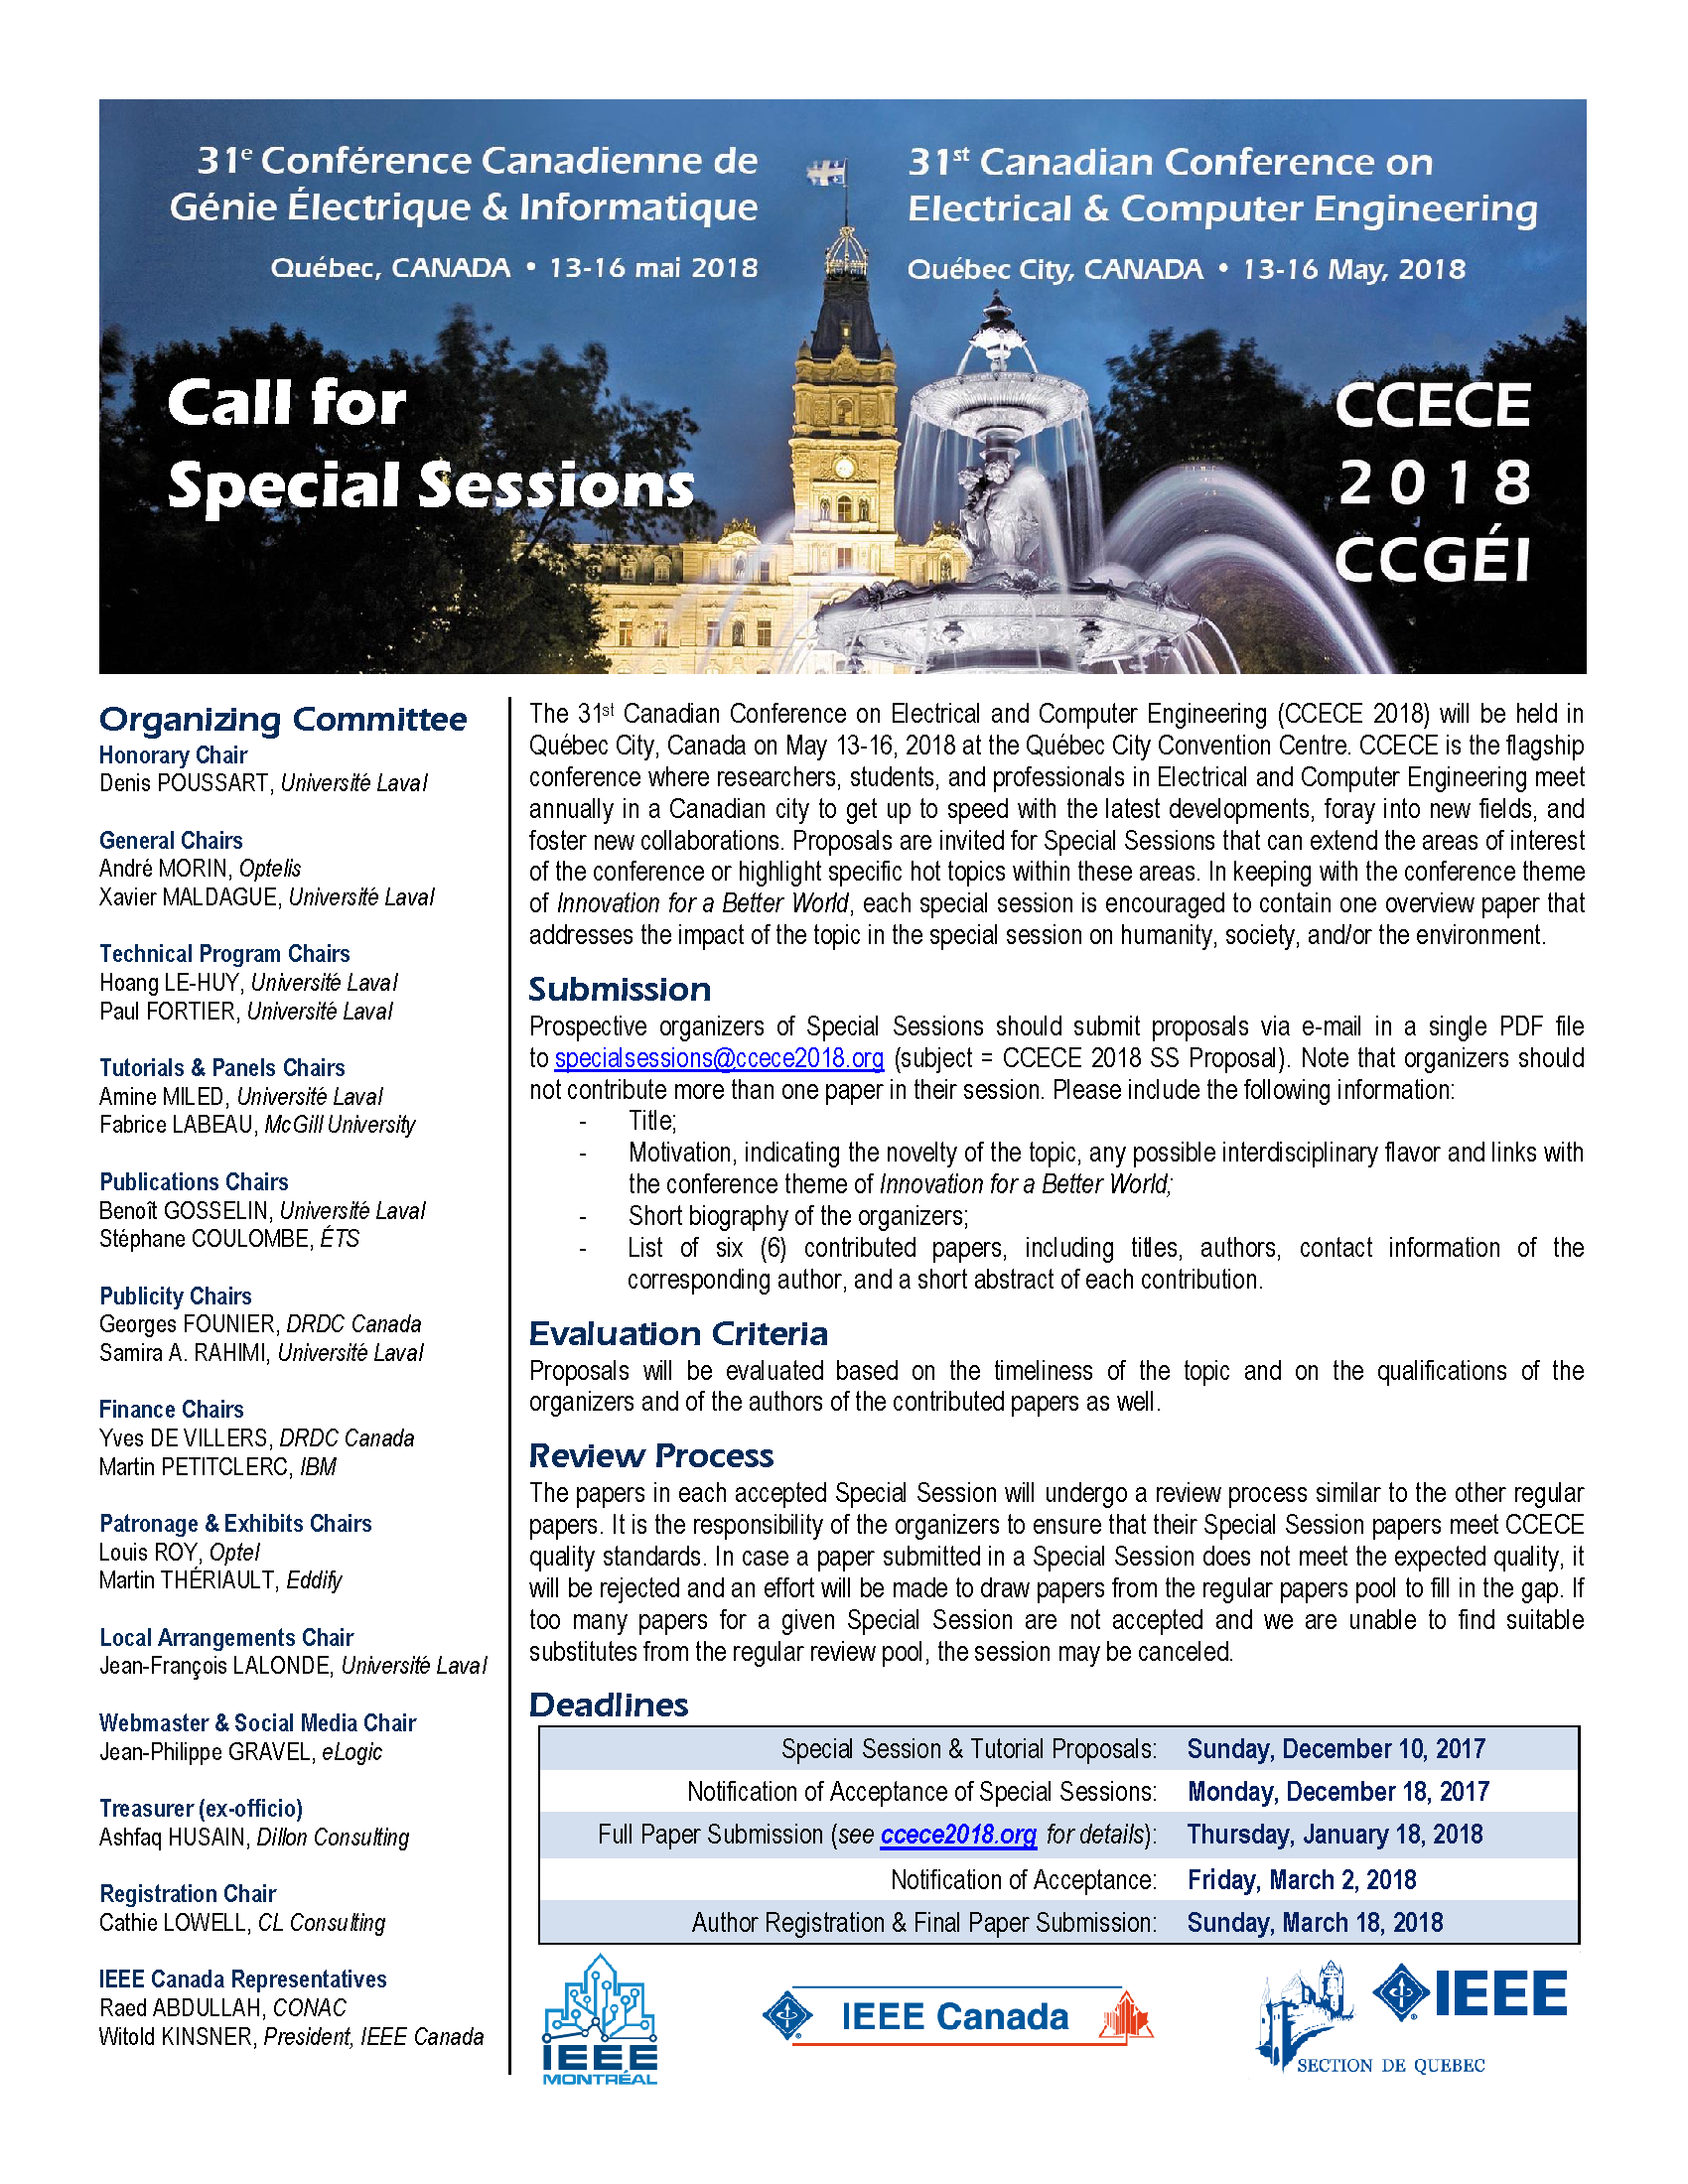 CCECE 2018 - Call for Special Sessions